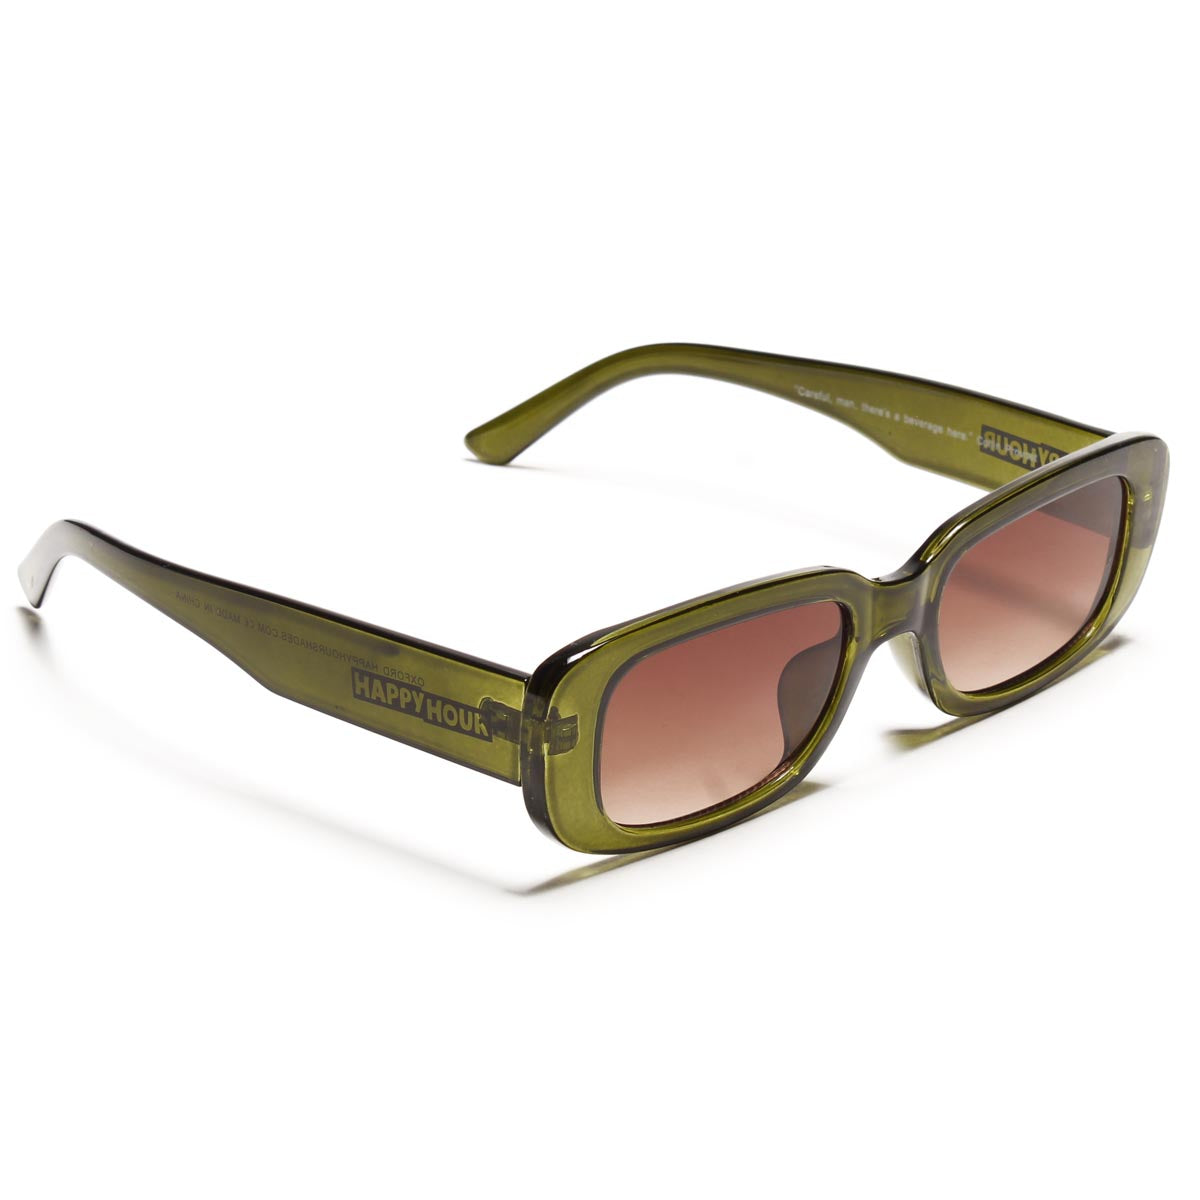 Happy Hour Provost Oxford Sunglasses - Gloss Moss image 1